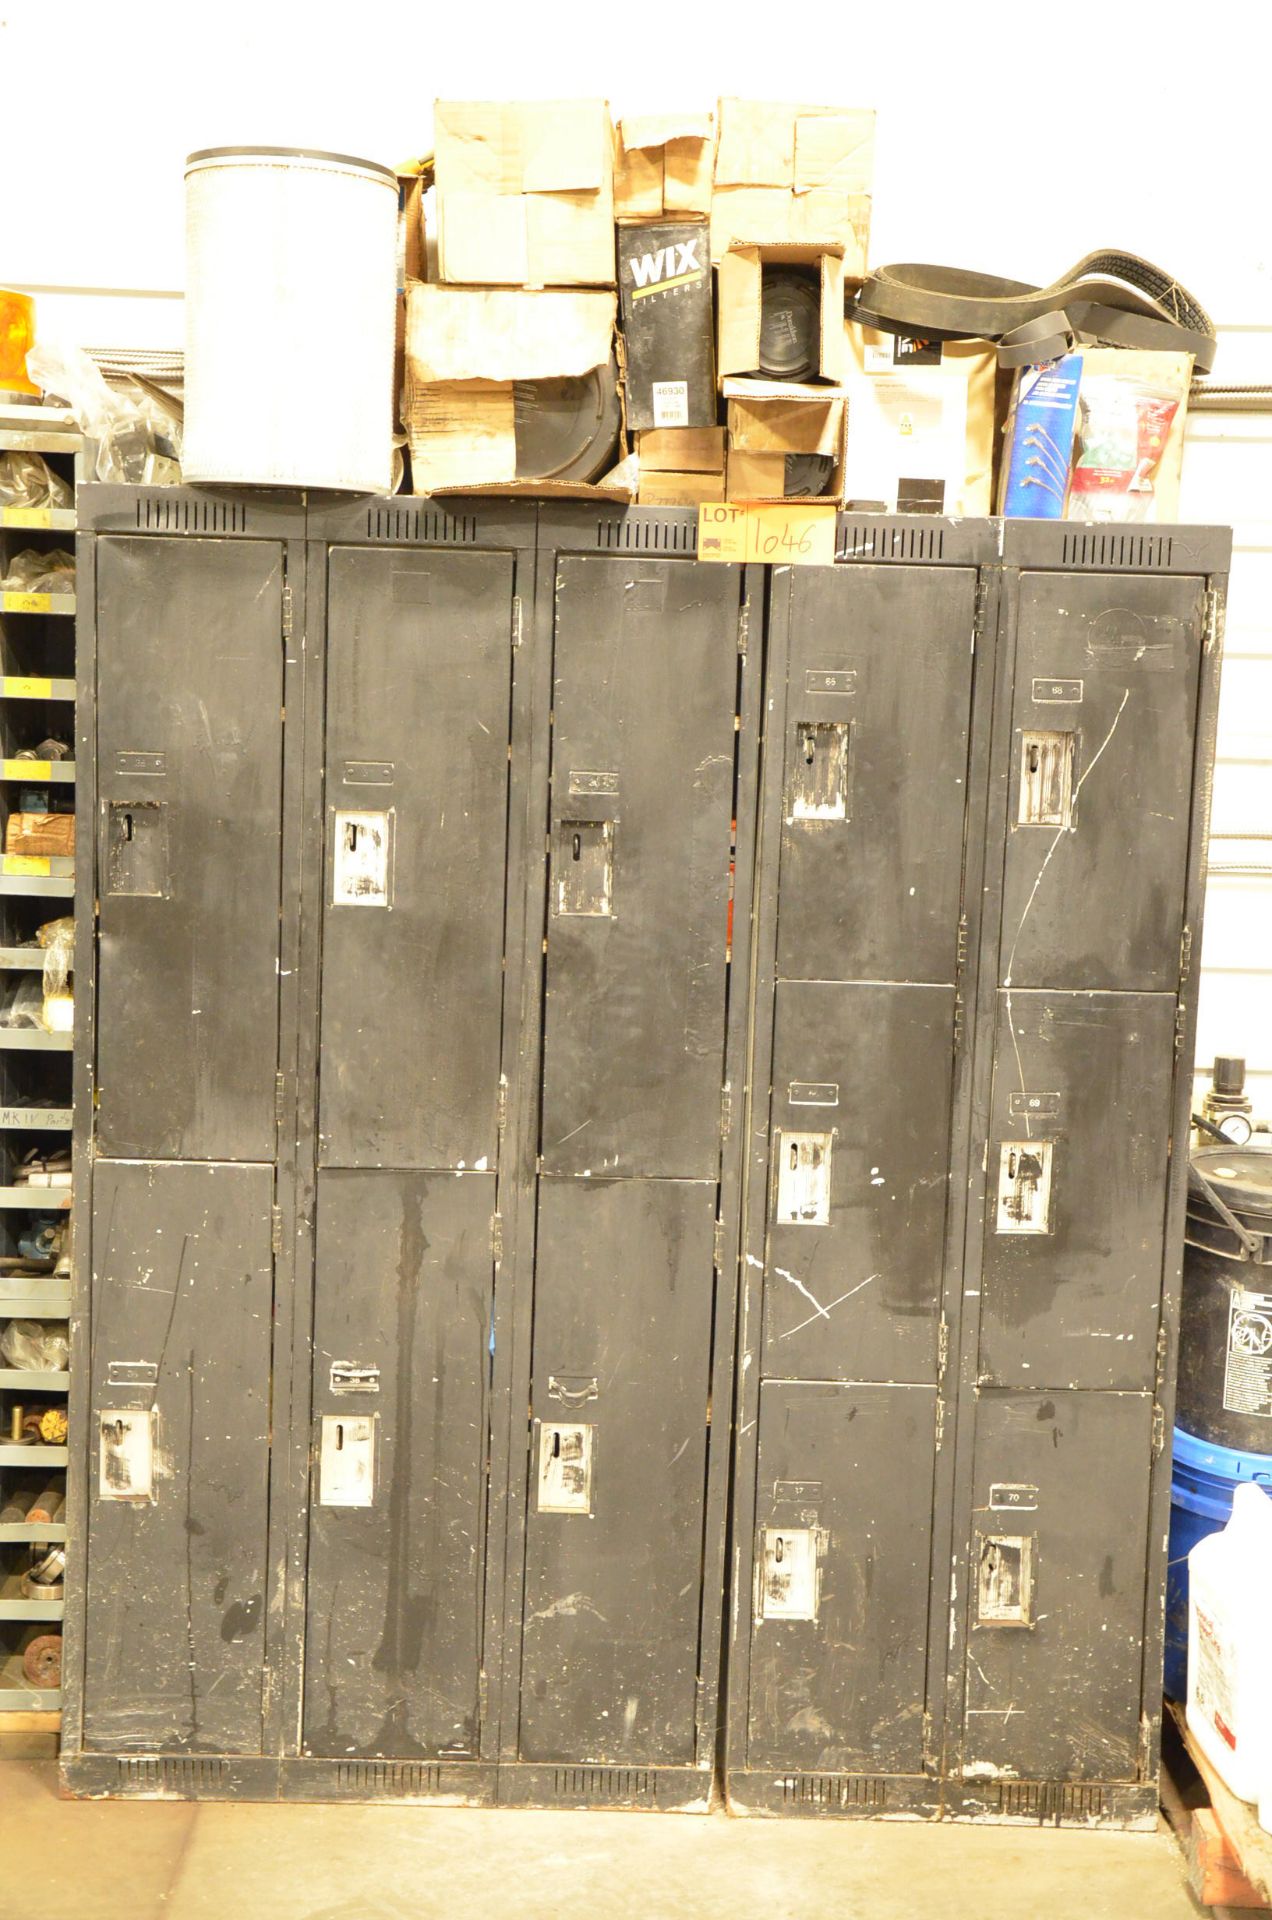 LOT/ CABINET WITH AUTOMOTIVE PARTS, CONSUMABLES, OILS AND LUBRICANTS (LOCATED AT 169A S SERVICE